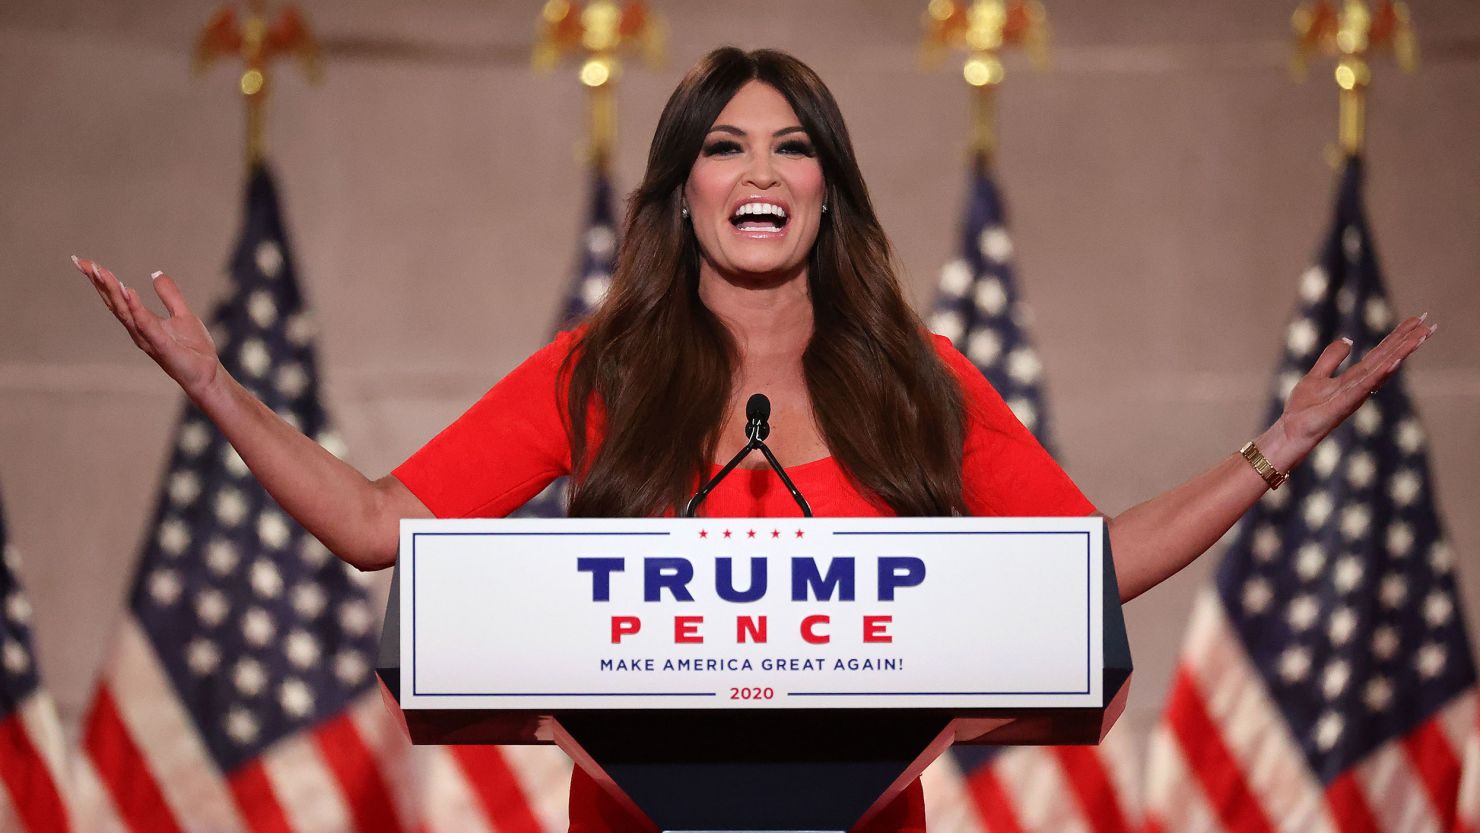 Kimberly Guilfoyle pre-records her address to the Republican National Convention at the Mellon Auditorium August 24, 2020 in Washington.